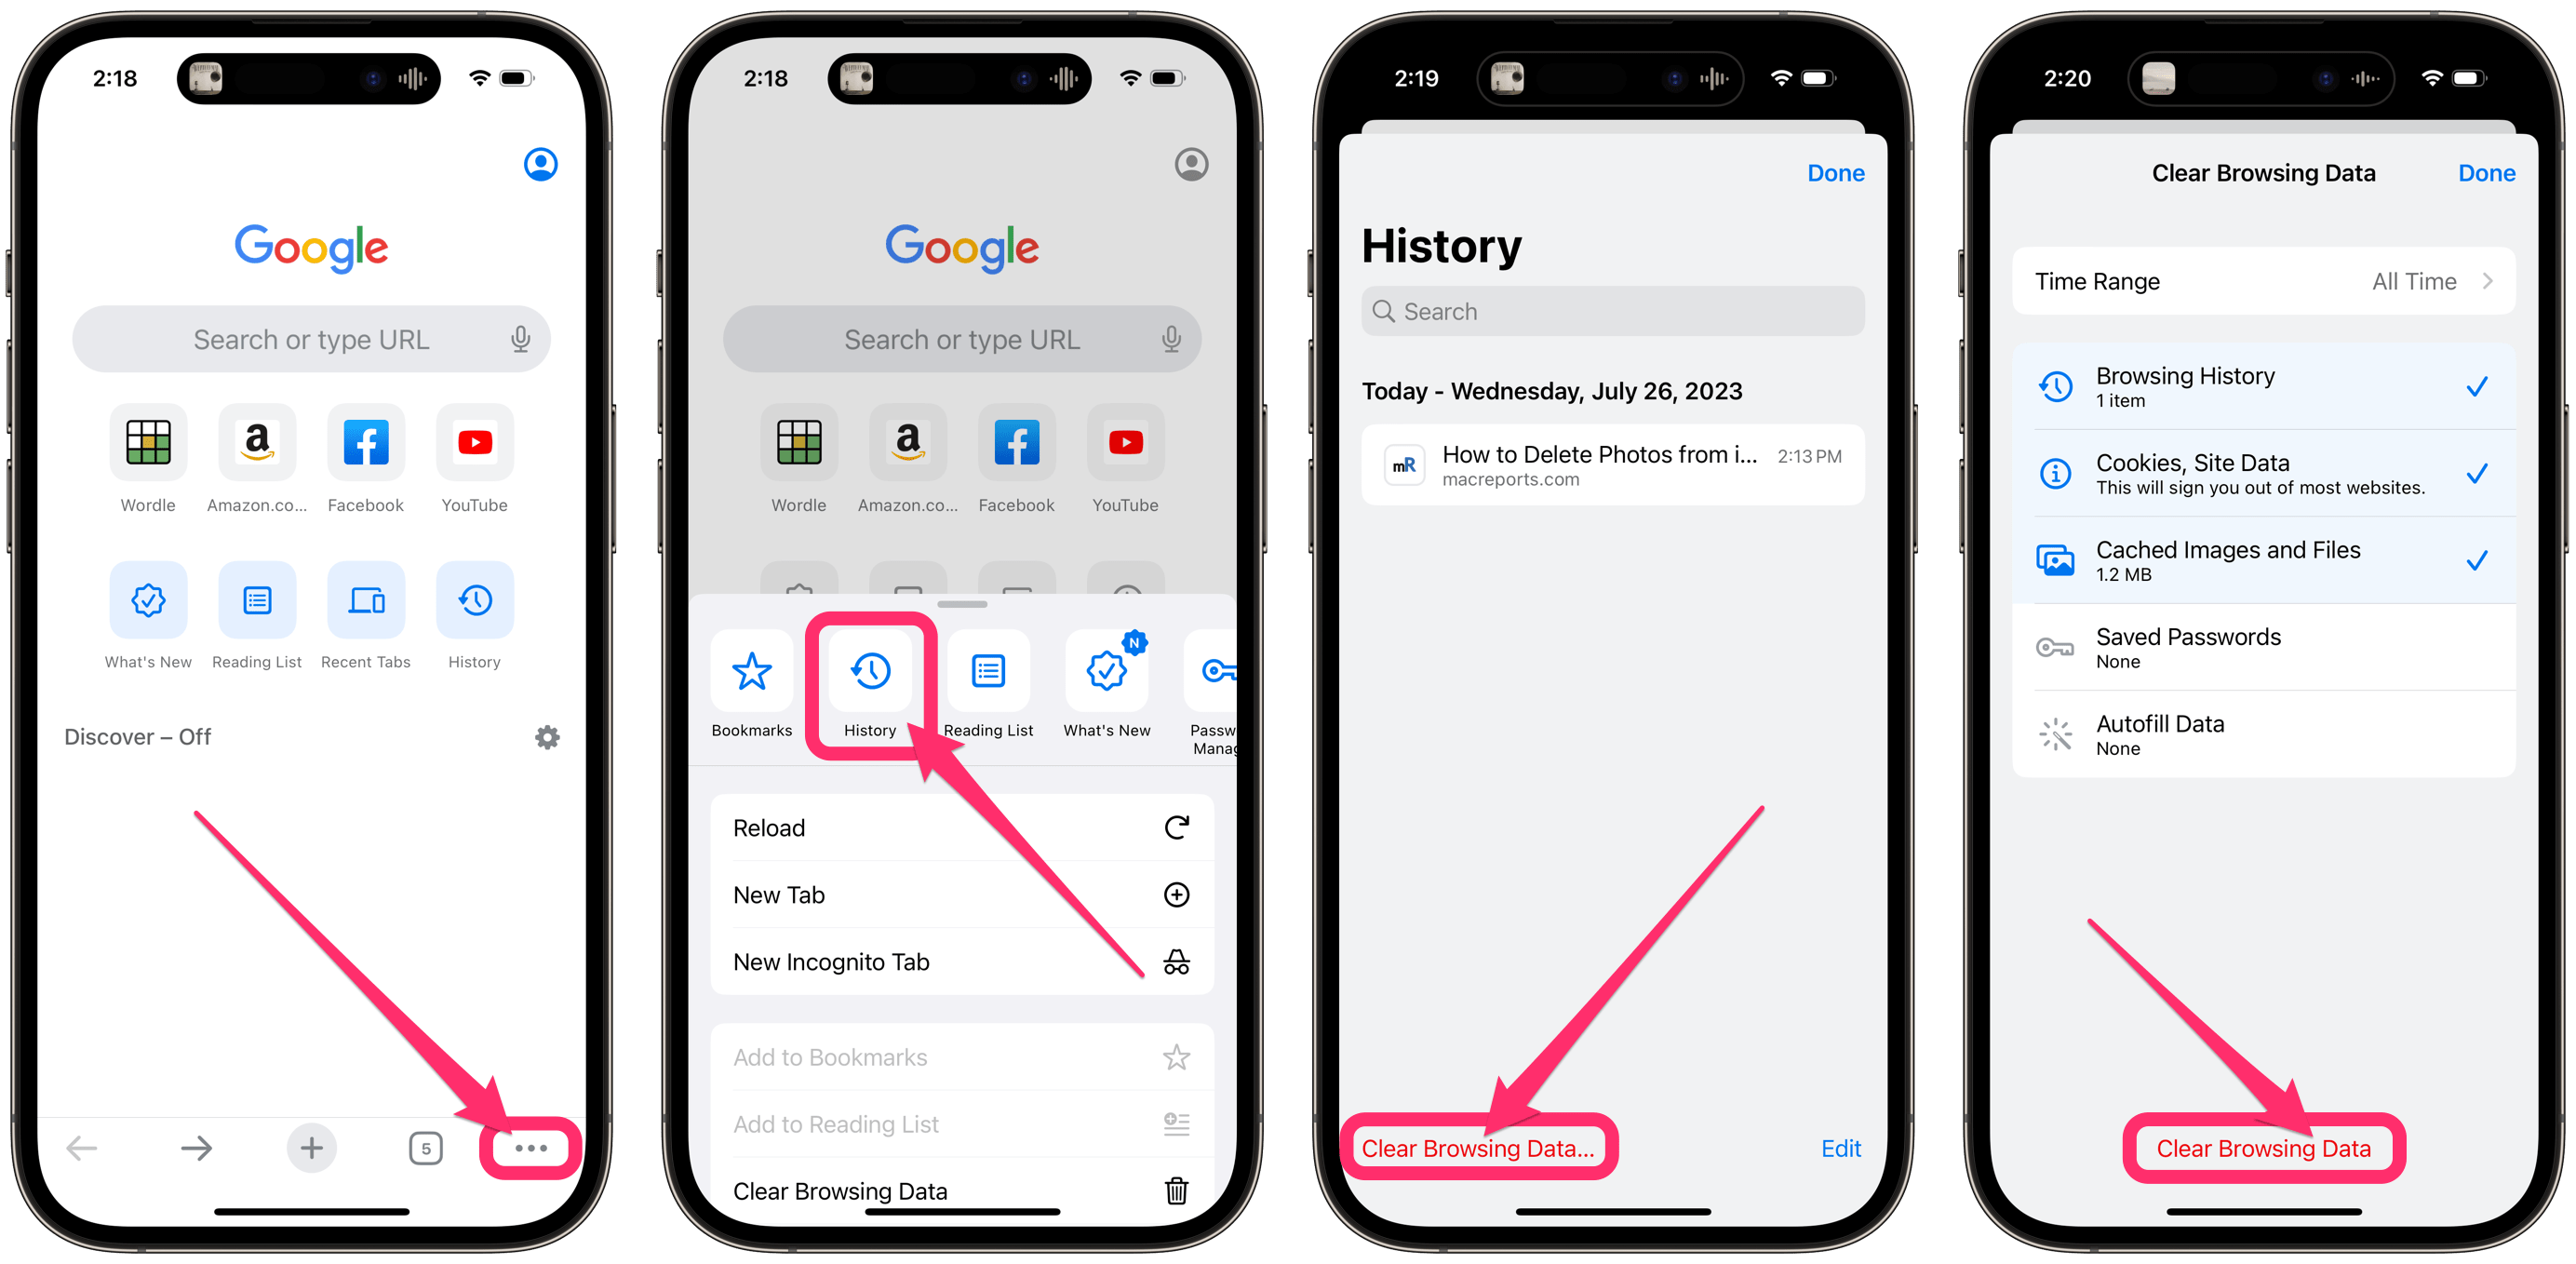 clear browsing data in Chrome on iPhone